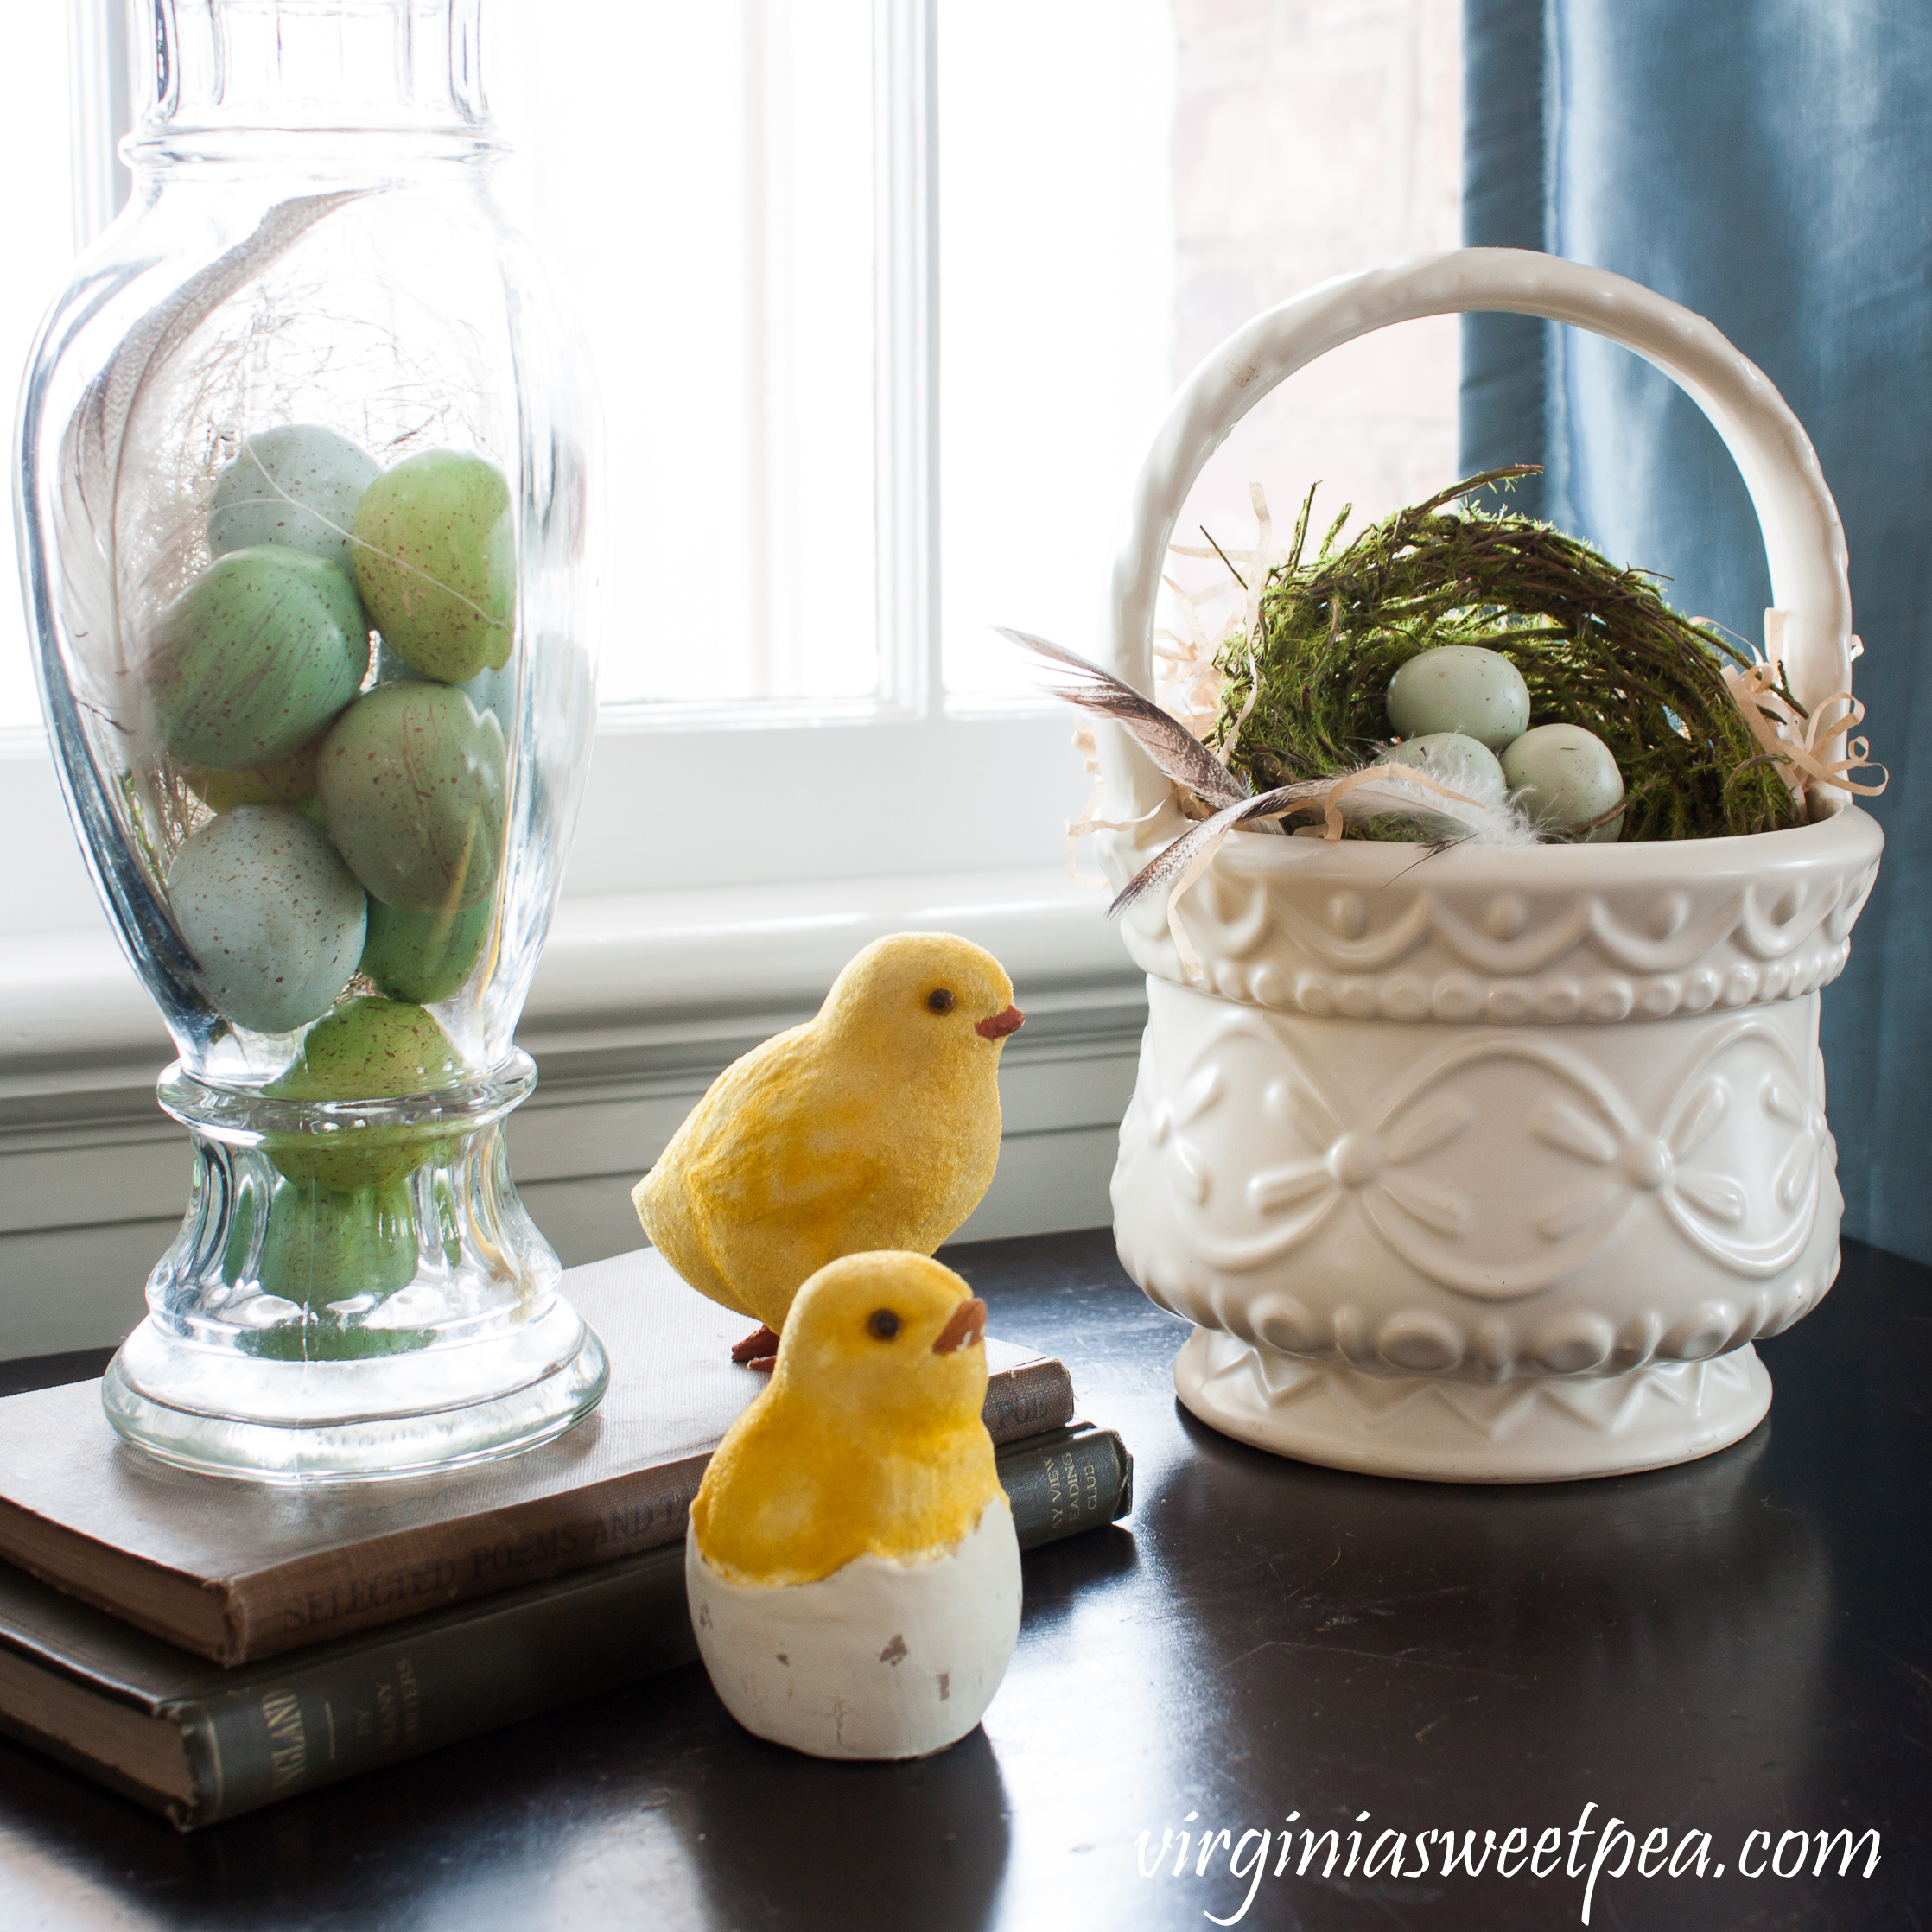 Easter vignette with eggs in a vintage glass candy holder, a nest in a Hull basket, chicks, and antique books #easterdecor #easterdecorations #vintagedecor #hull